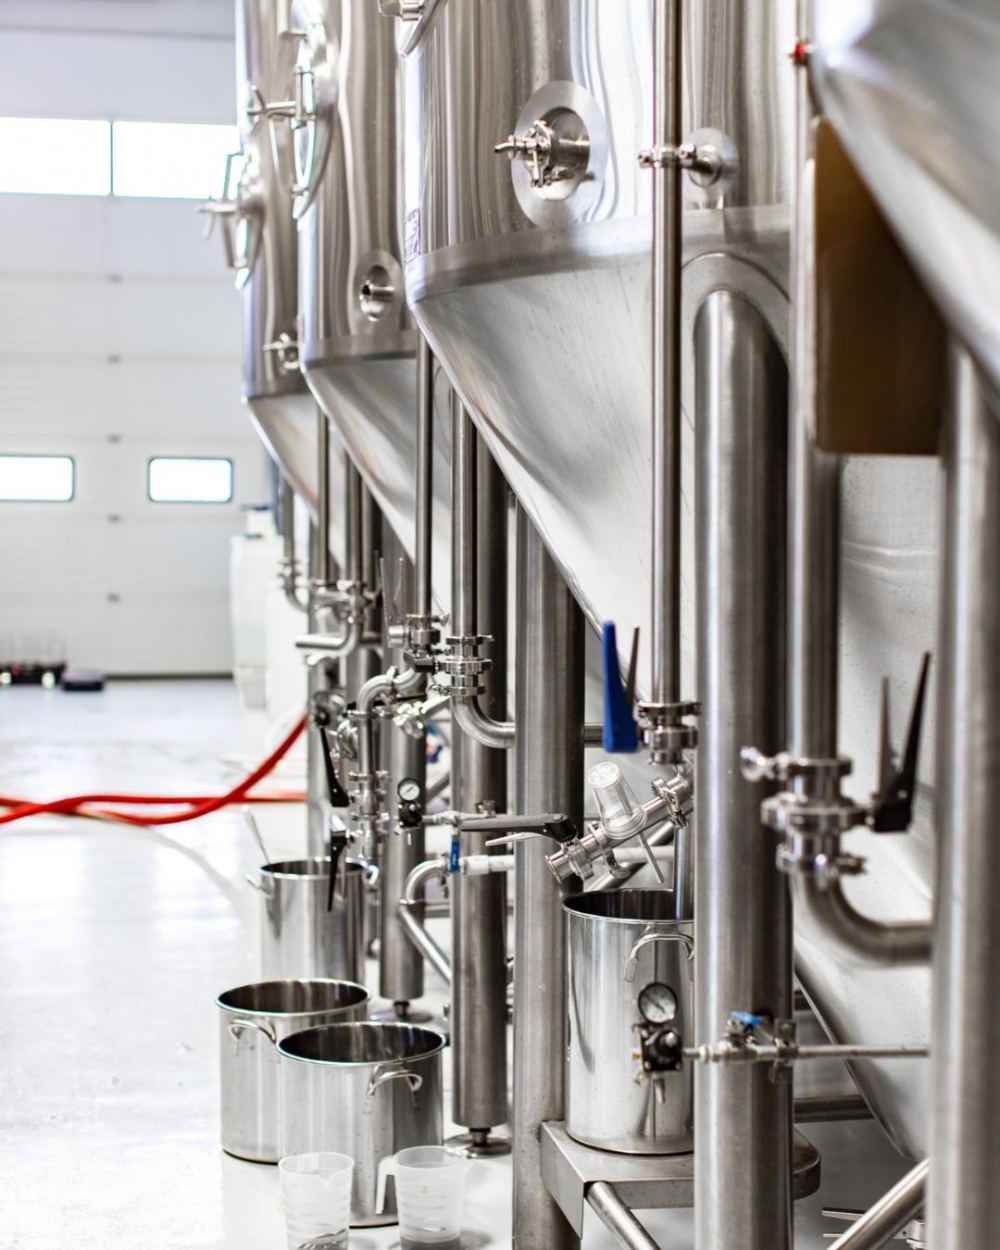 5 top tips for brewery brewers to improve tank cleaning with CIP